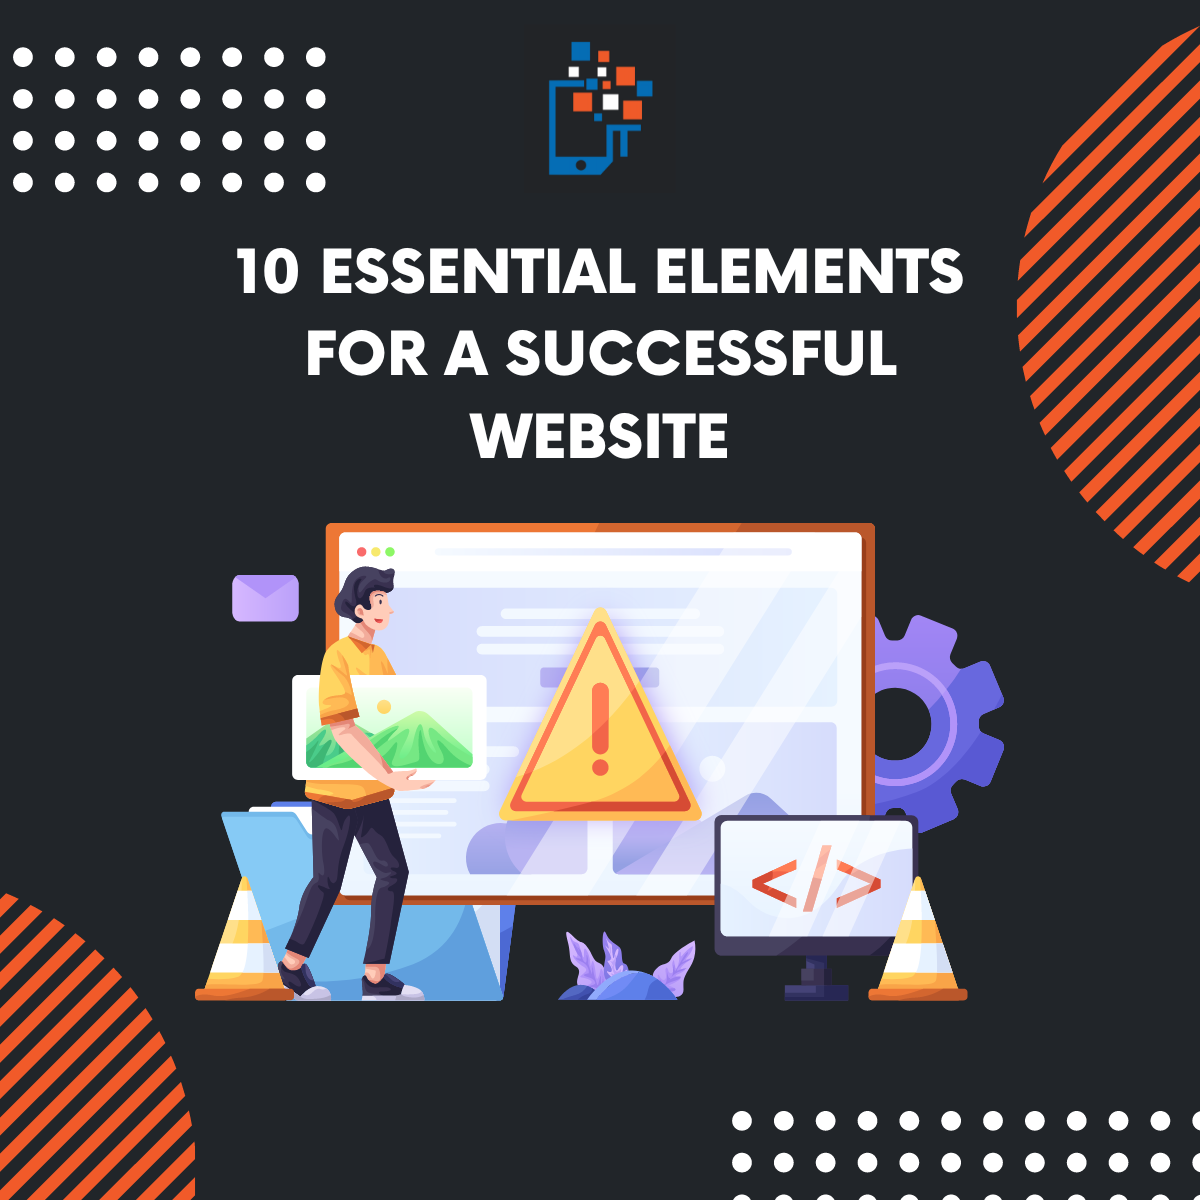 10 Essential Elements for a Successful Website